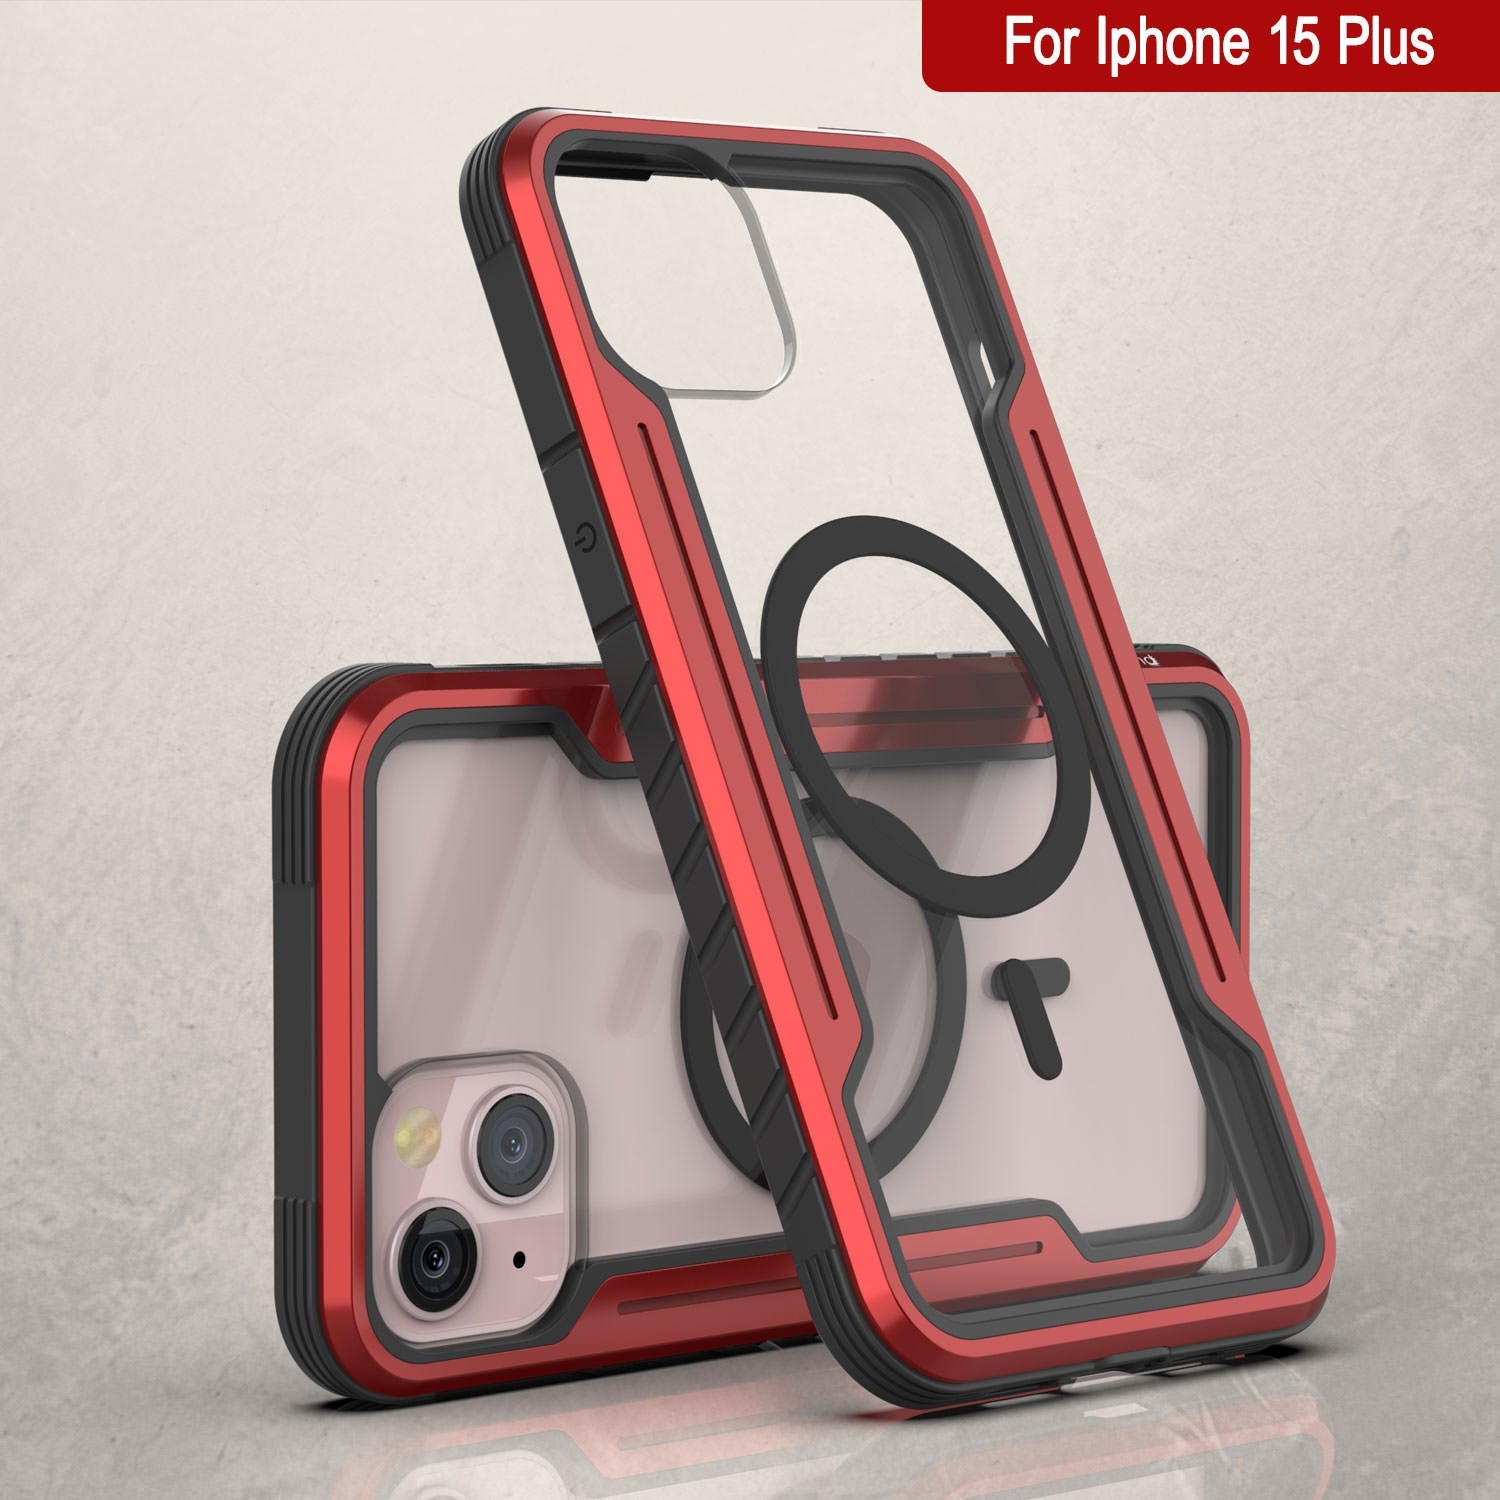 Punkcase iPhone 15 Plus Armor Stealth MAG Defense Case Protective Military Grade Multilayer Cover [Red]